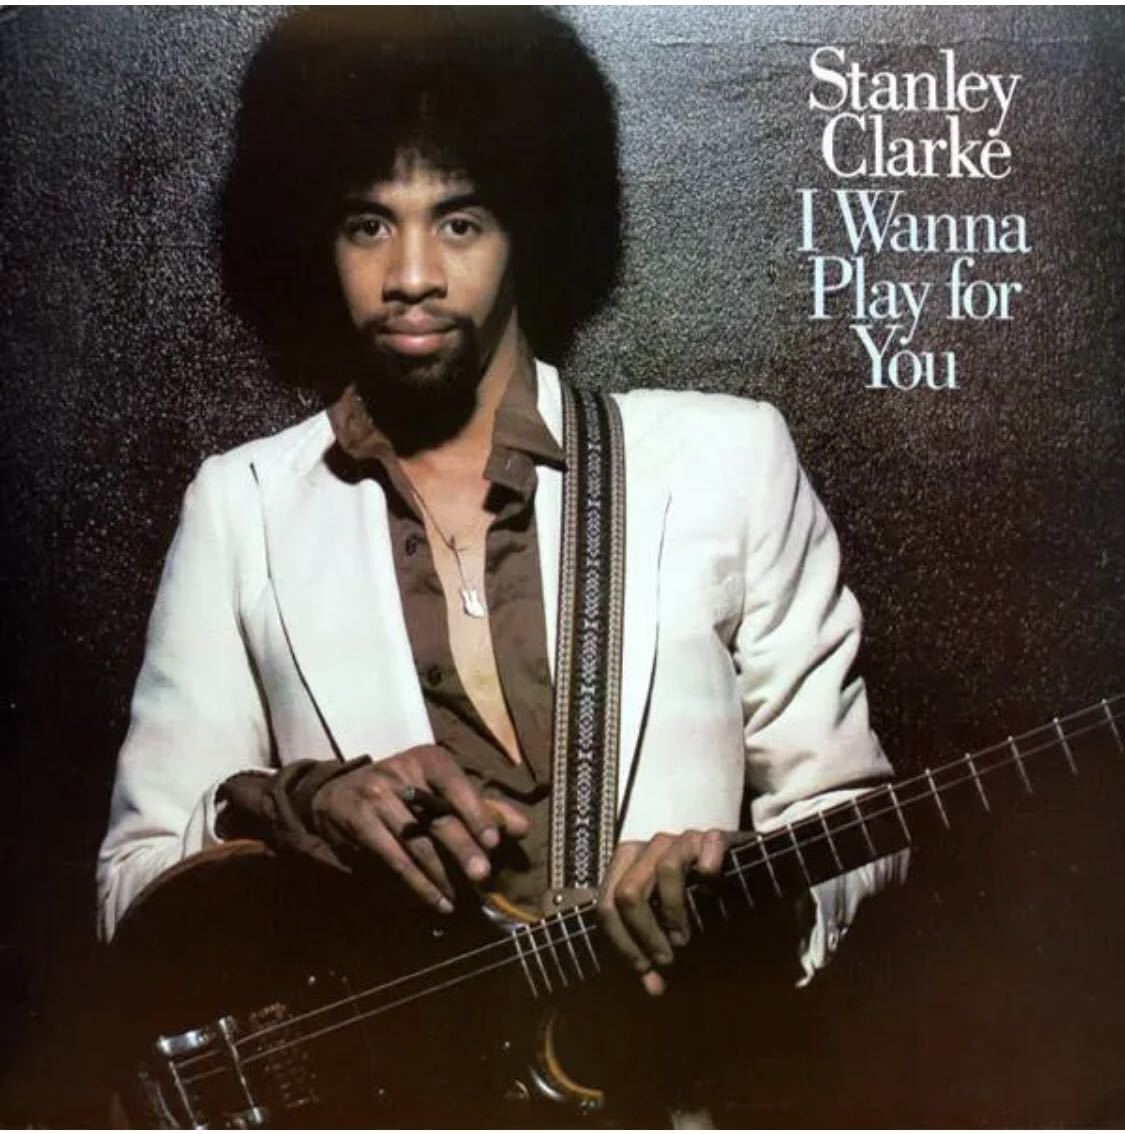 JEFF BECK参加！STANLEY CLARKE/ I WANNA PLAY FOR YOU